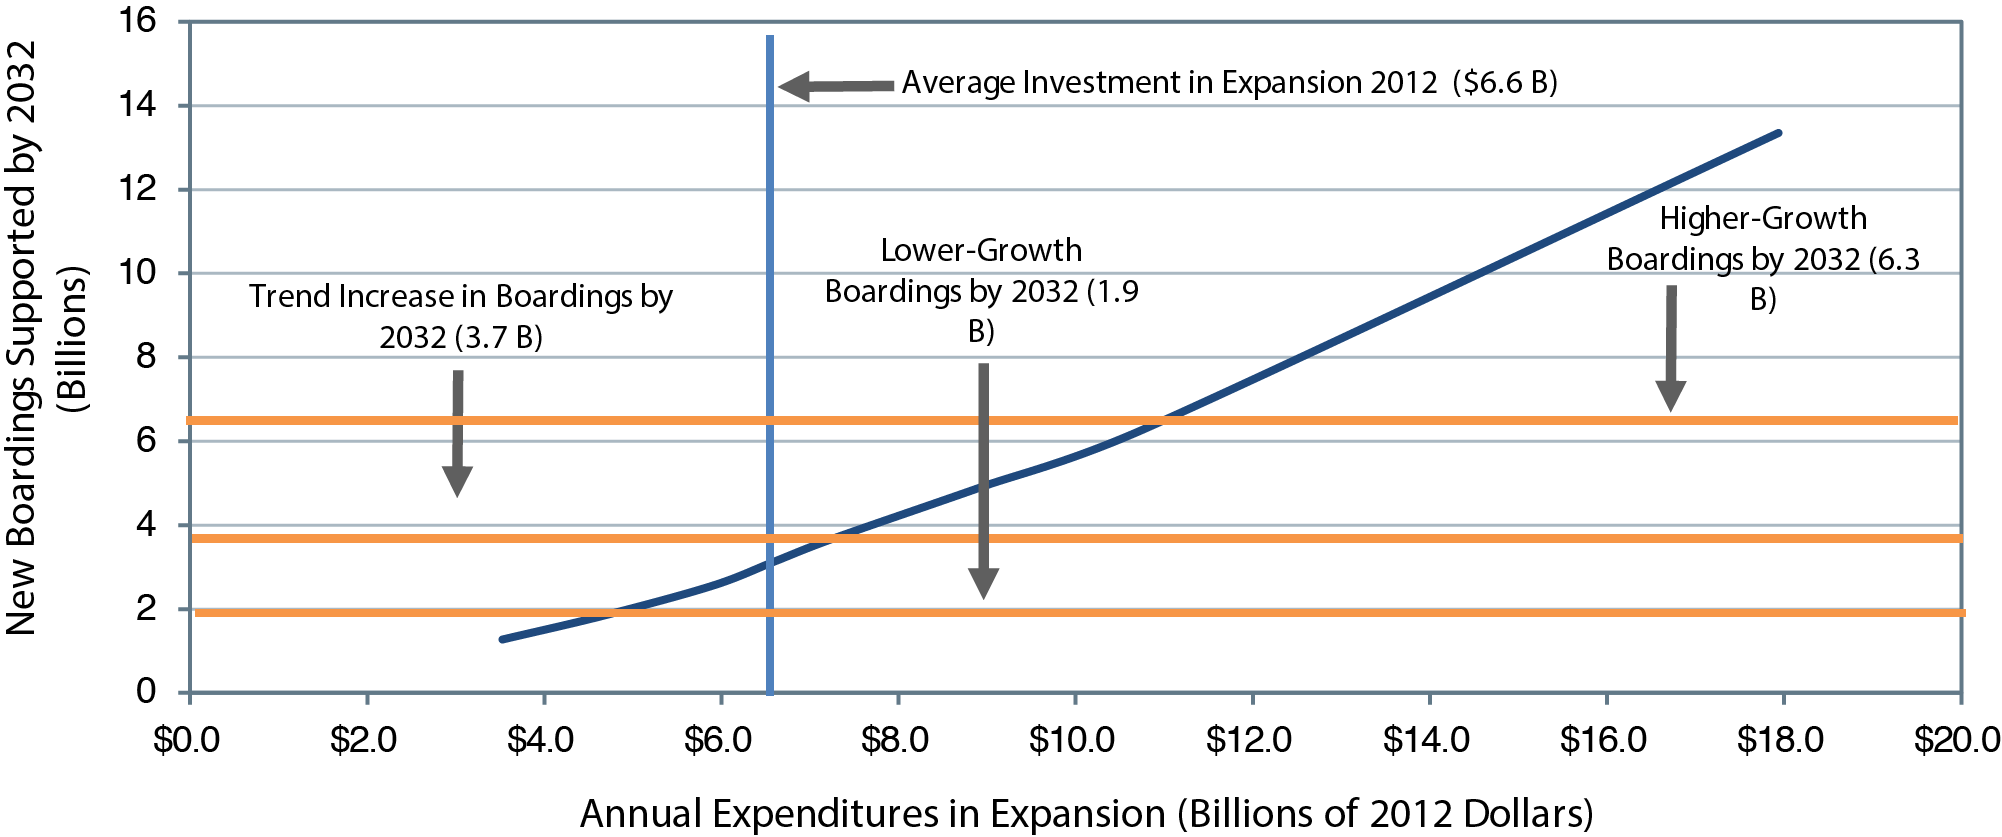 A line chart plots new boardings supported by the year 2032 over annual expenditures in expansion. The plot has an initial value of 1.3 billion new riders supported annually at an annual expenditure of $3.5 billion, and trends upward to a value of 13.3 billion new riders supported annually at an annual expenditure of $17.9 billion. The plot intersects with the trend increase of 3.7 billion in boardings by 2032. The current average investment in expansion is $6.6 billion. Source: Transit Economic Requirements Model. 